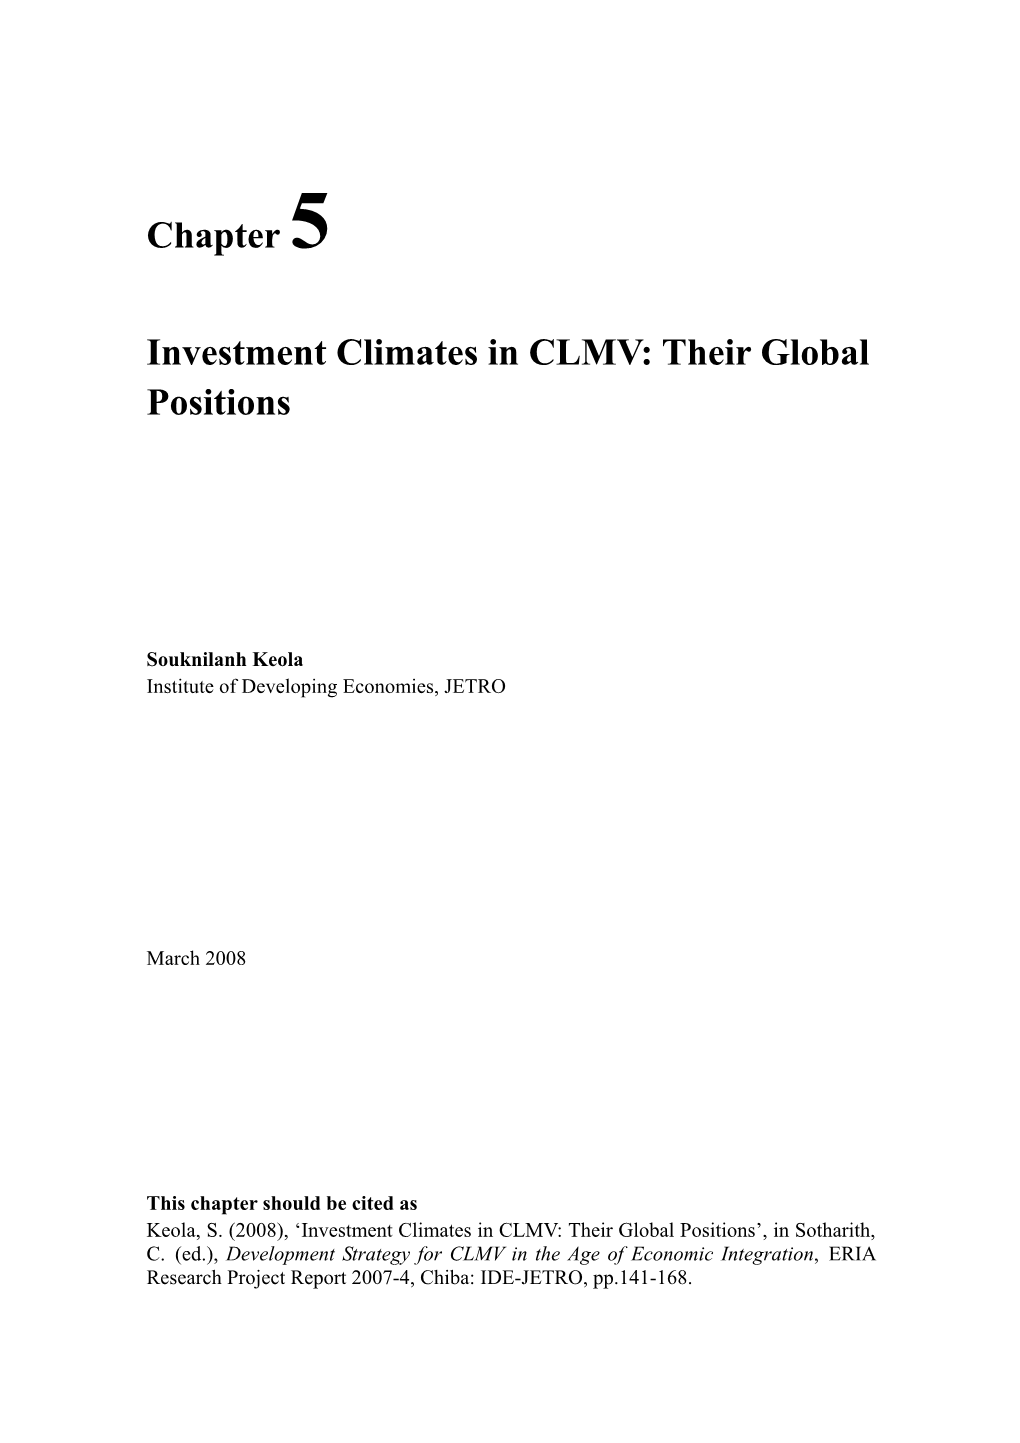 Chapter 5 Investment Climates in CLMV